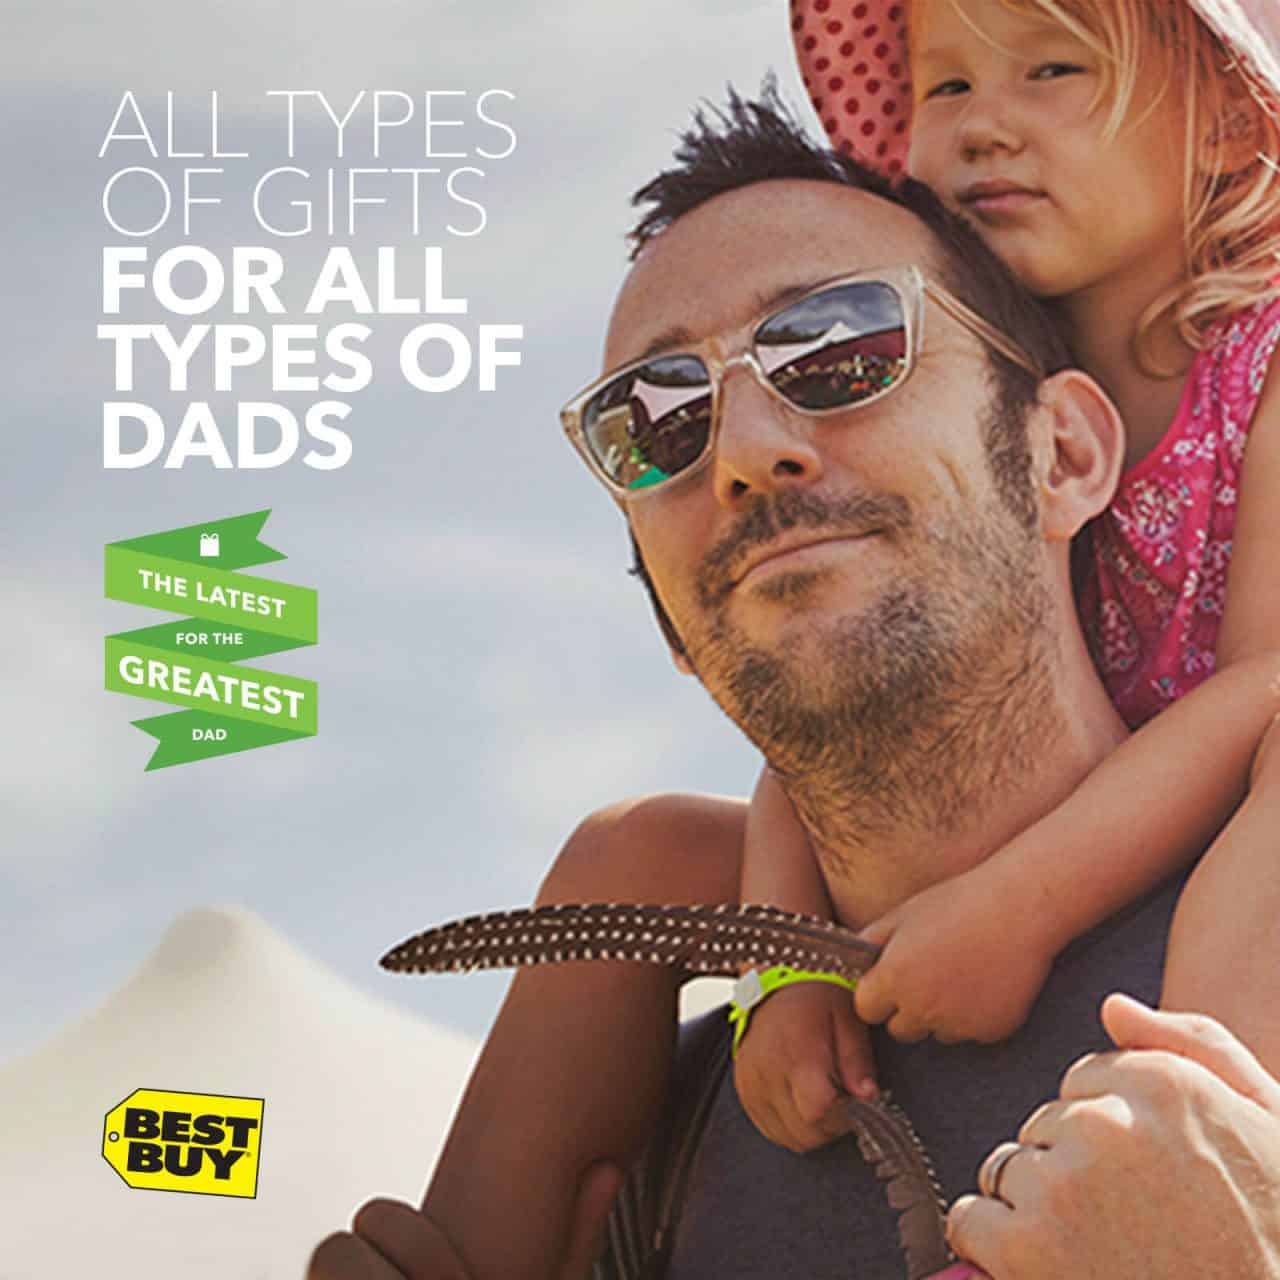 All Types of Gifts for All Types of Dads